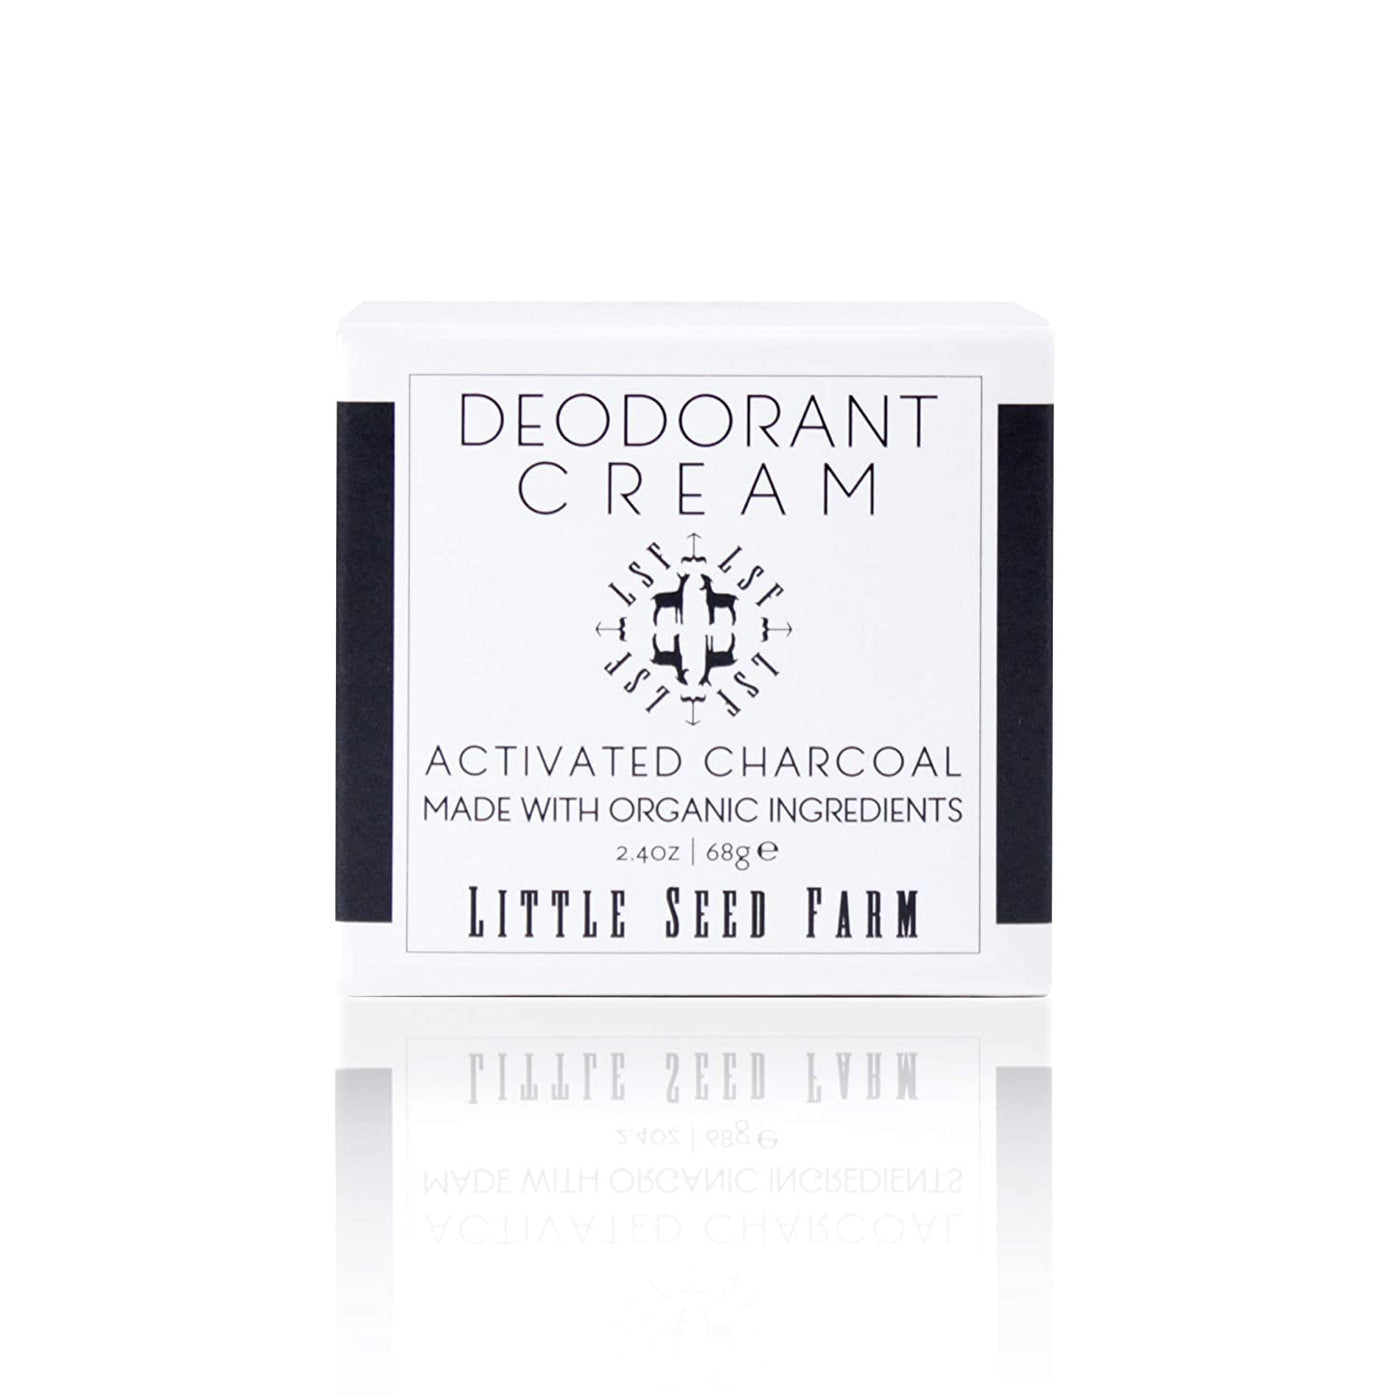 Little Seed Farm All Natural Deodorant Cream with Activated Charcoal